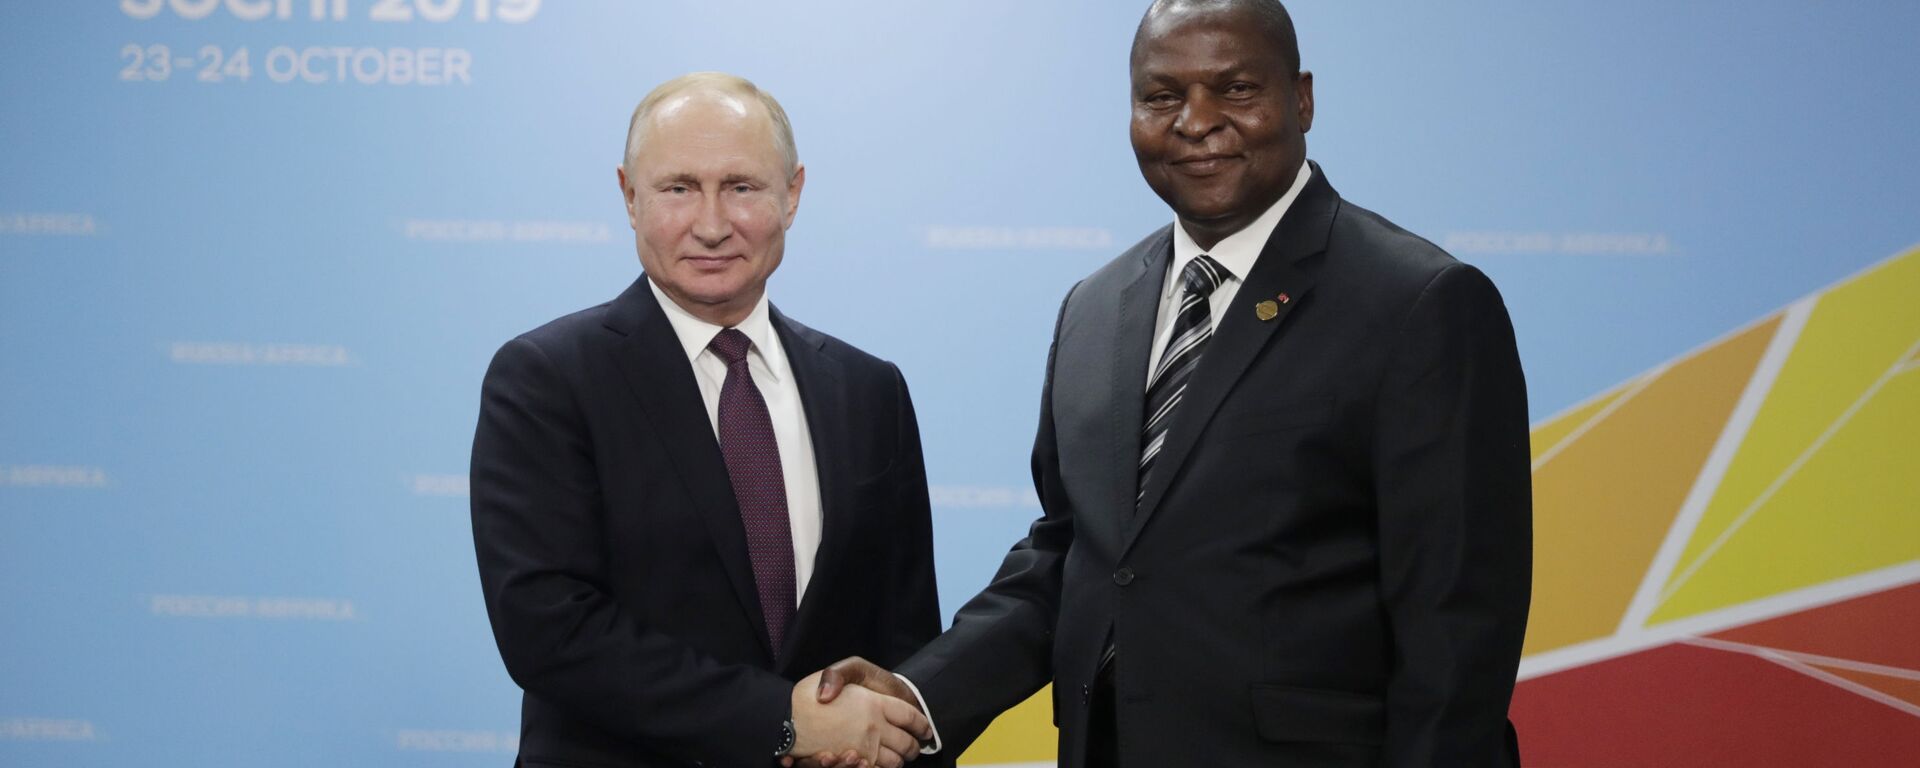 Russian President Vladimir Putin and Central African Republic President Faustin Archange Touadera shake hands as they pose for a photo prior to their meeting at the 2019 Russia-Africa Summit and Economic Forum in Sochi, Russia - Sputnik International, 1920, 18.11.2022